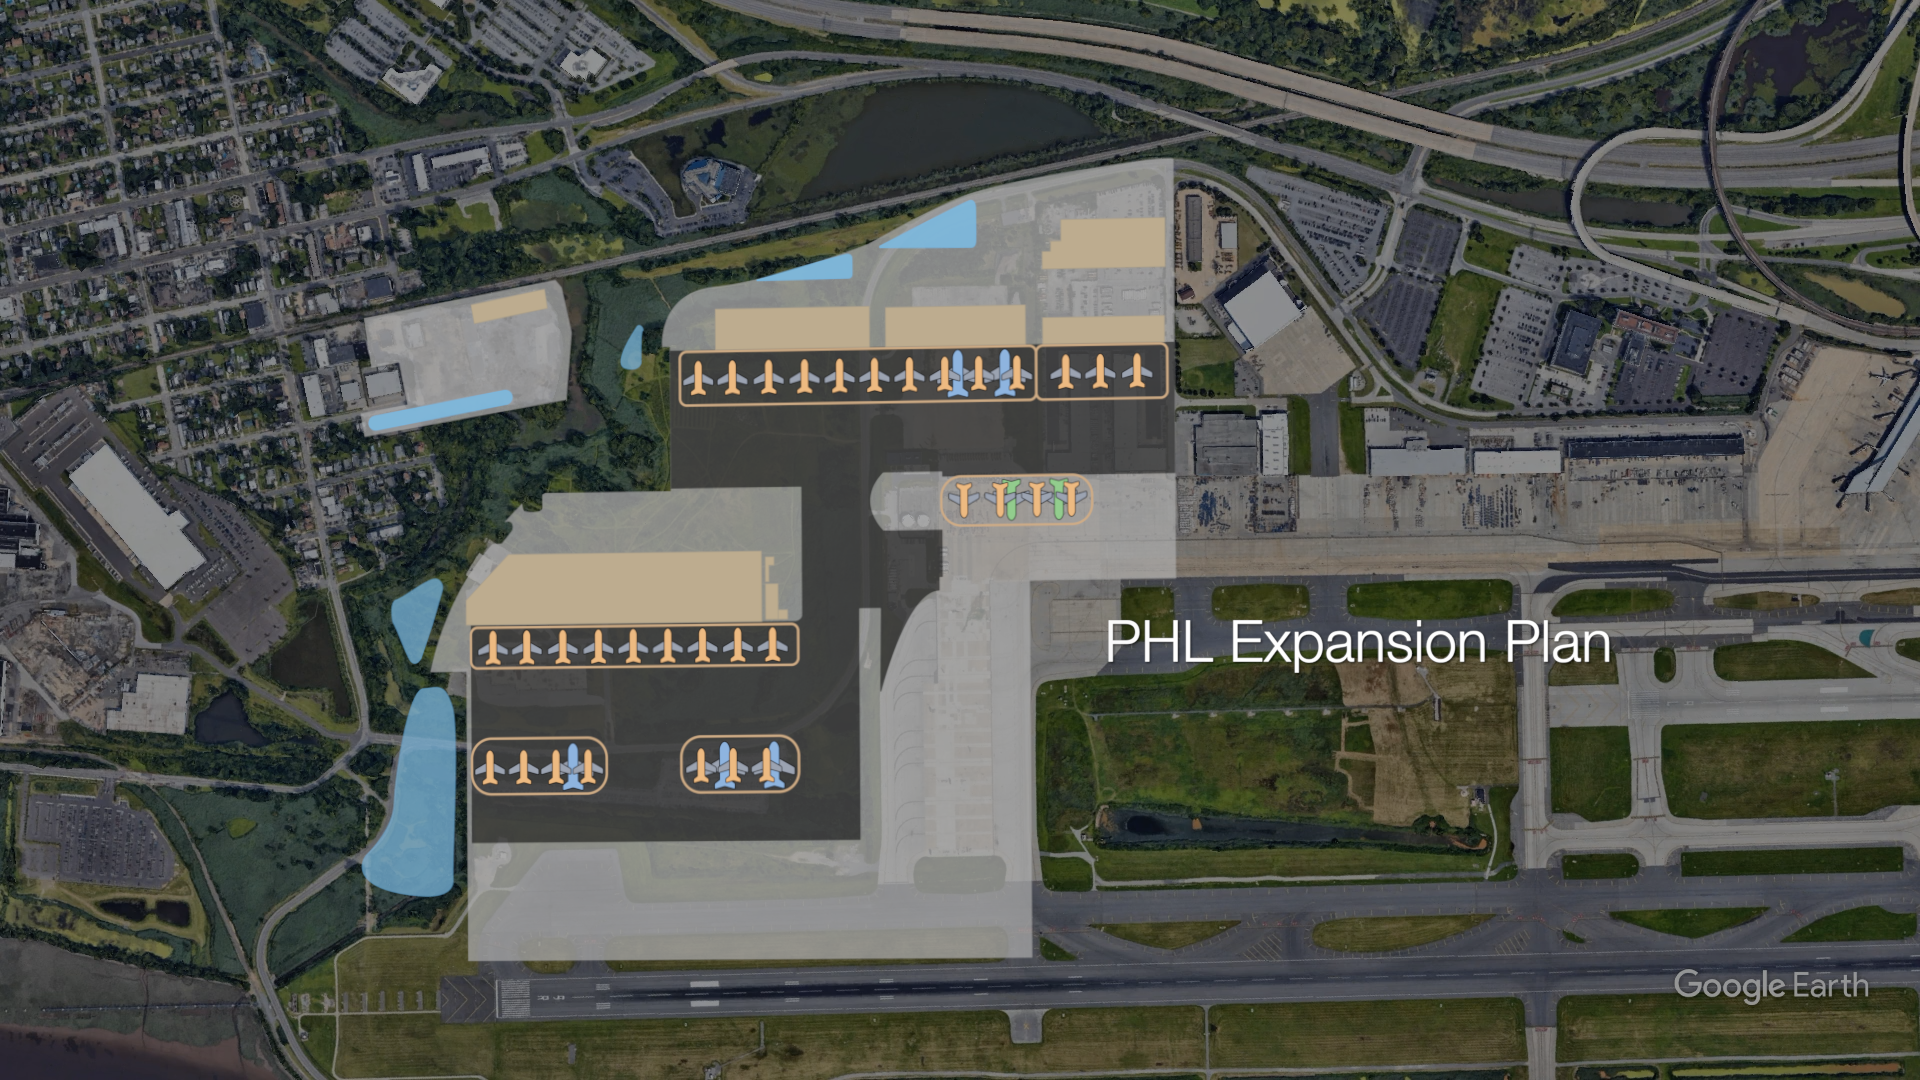 PHL Airport Wants to Expand. Some Neighbors Fear It'll Flood Their Homes